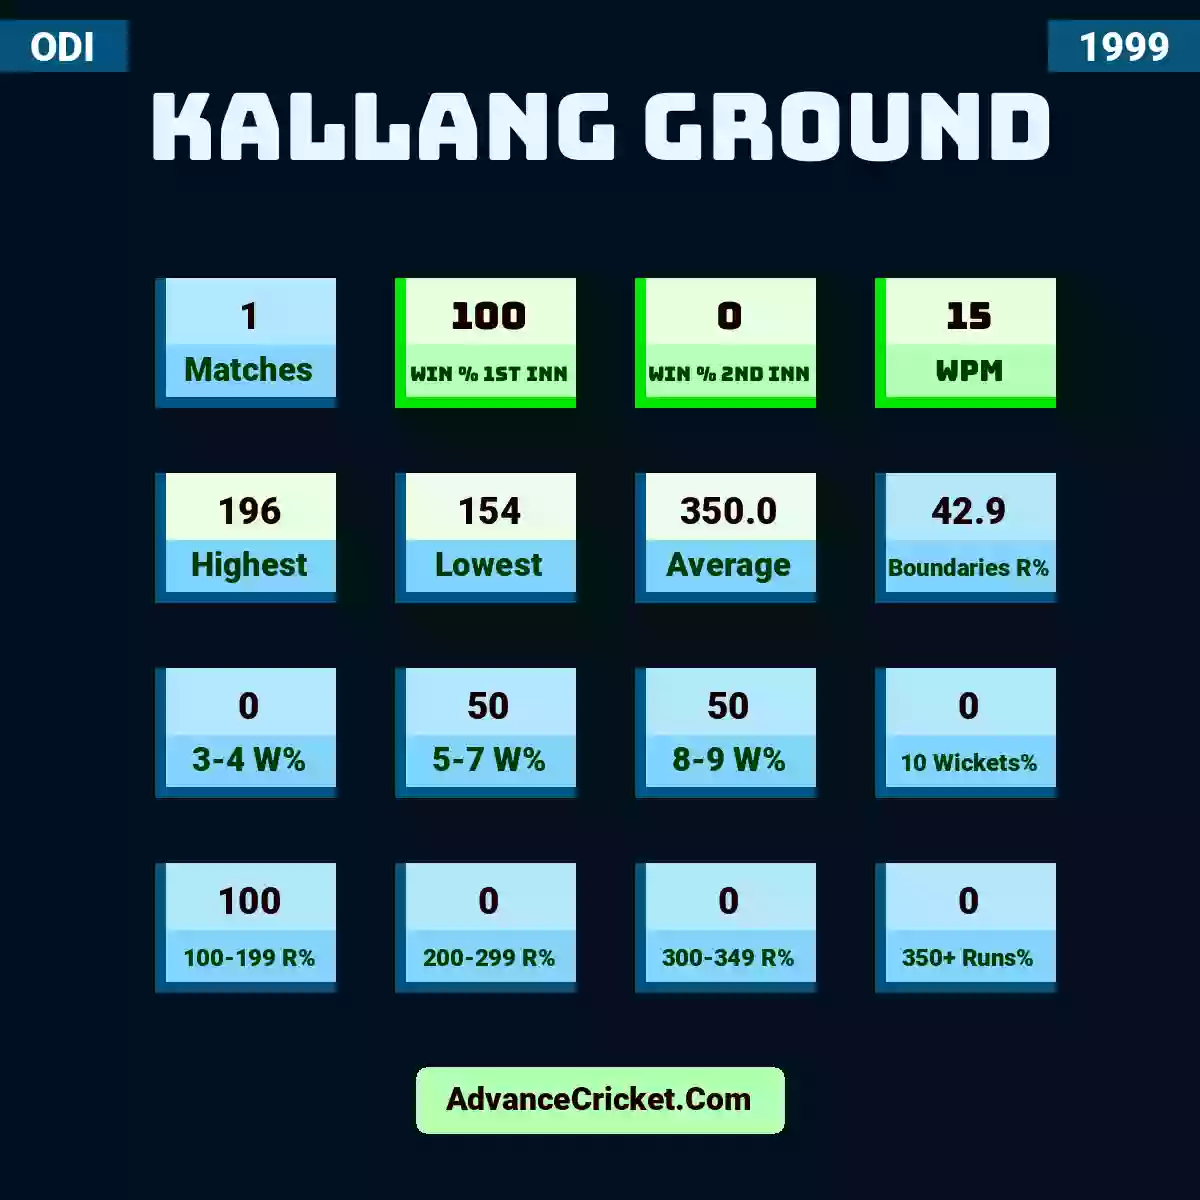 Image showing Kallang Ground with Matches: 1, Win % 1st Inn: 100, Win % 2nd Inn: 0, WPM: 15, Highest: 196, Lowest: 154, Average: 350.0, Boundaries R%: 42.9, 3-4 W%: 0, 5-7 W%: 50, 8-9 W%: 50, 10 Wickets%: 0, 100-199 R%: 100, 200-299 R%: 0, 300-349 R%: 0, 350+ Runs%: 0.